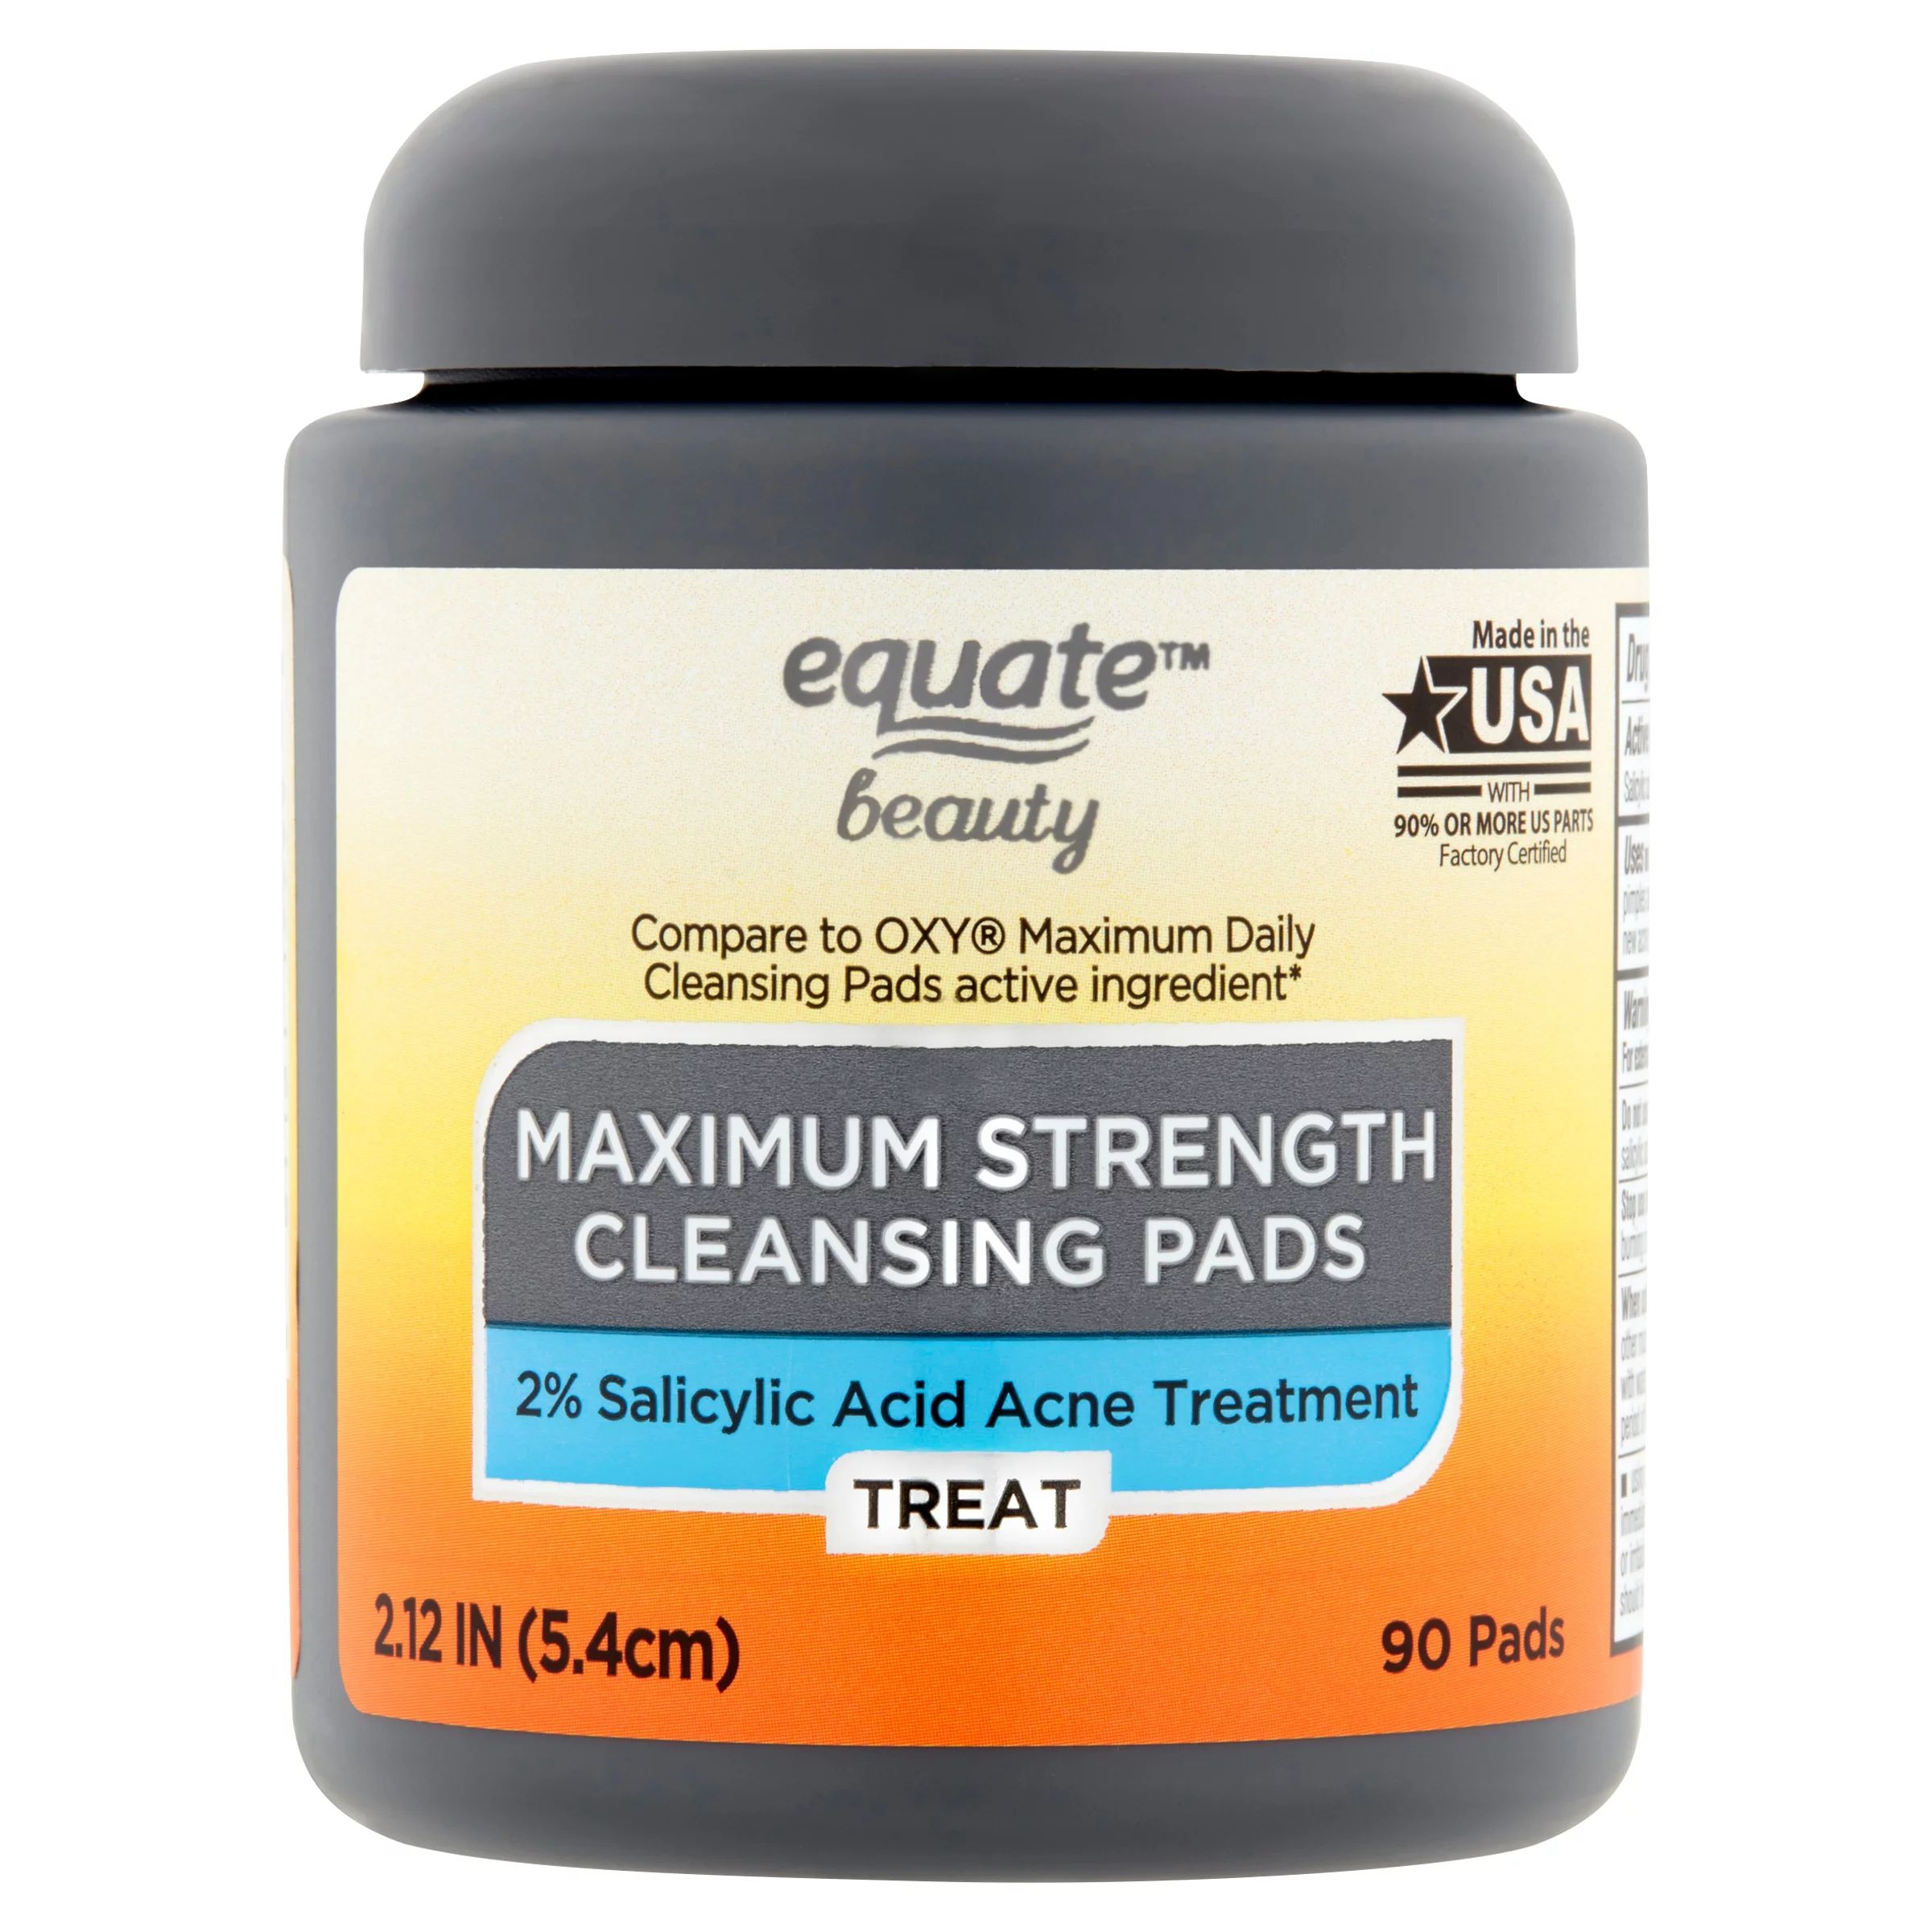 Equate Beauty Maximum Strength Cleansing Pads, 90 Count | Walmart (US)